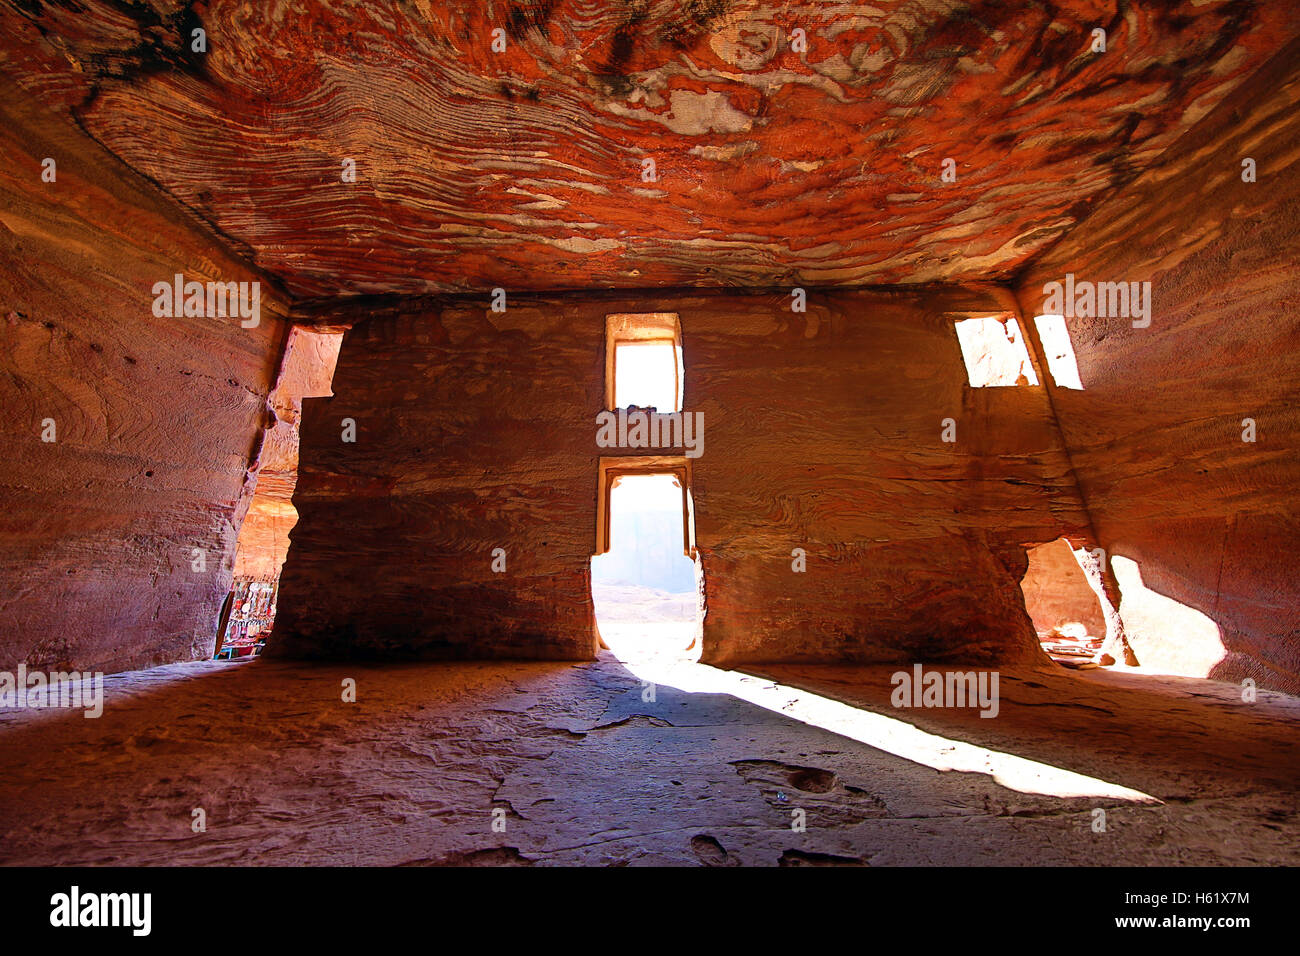 Light streaming through the windows of the Urn Tomb of the Royal Tombs in the rock city of Petra, Jordan Stock Photo